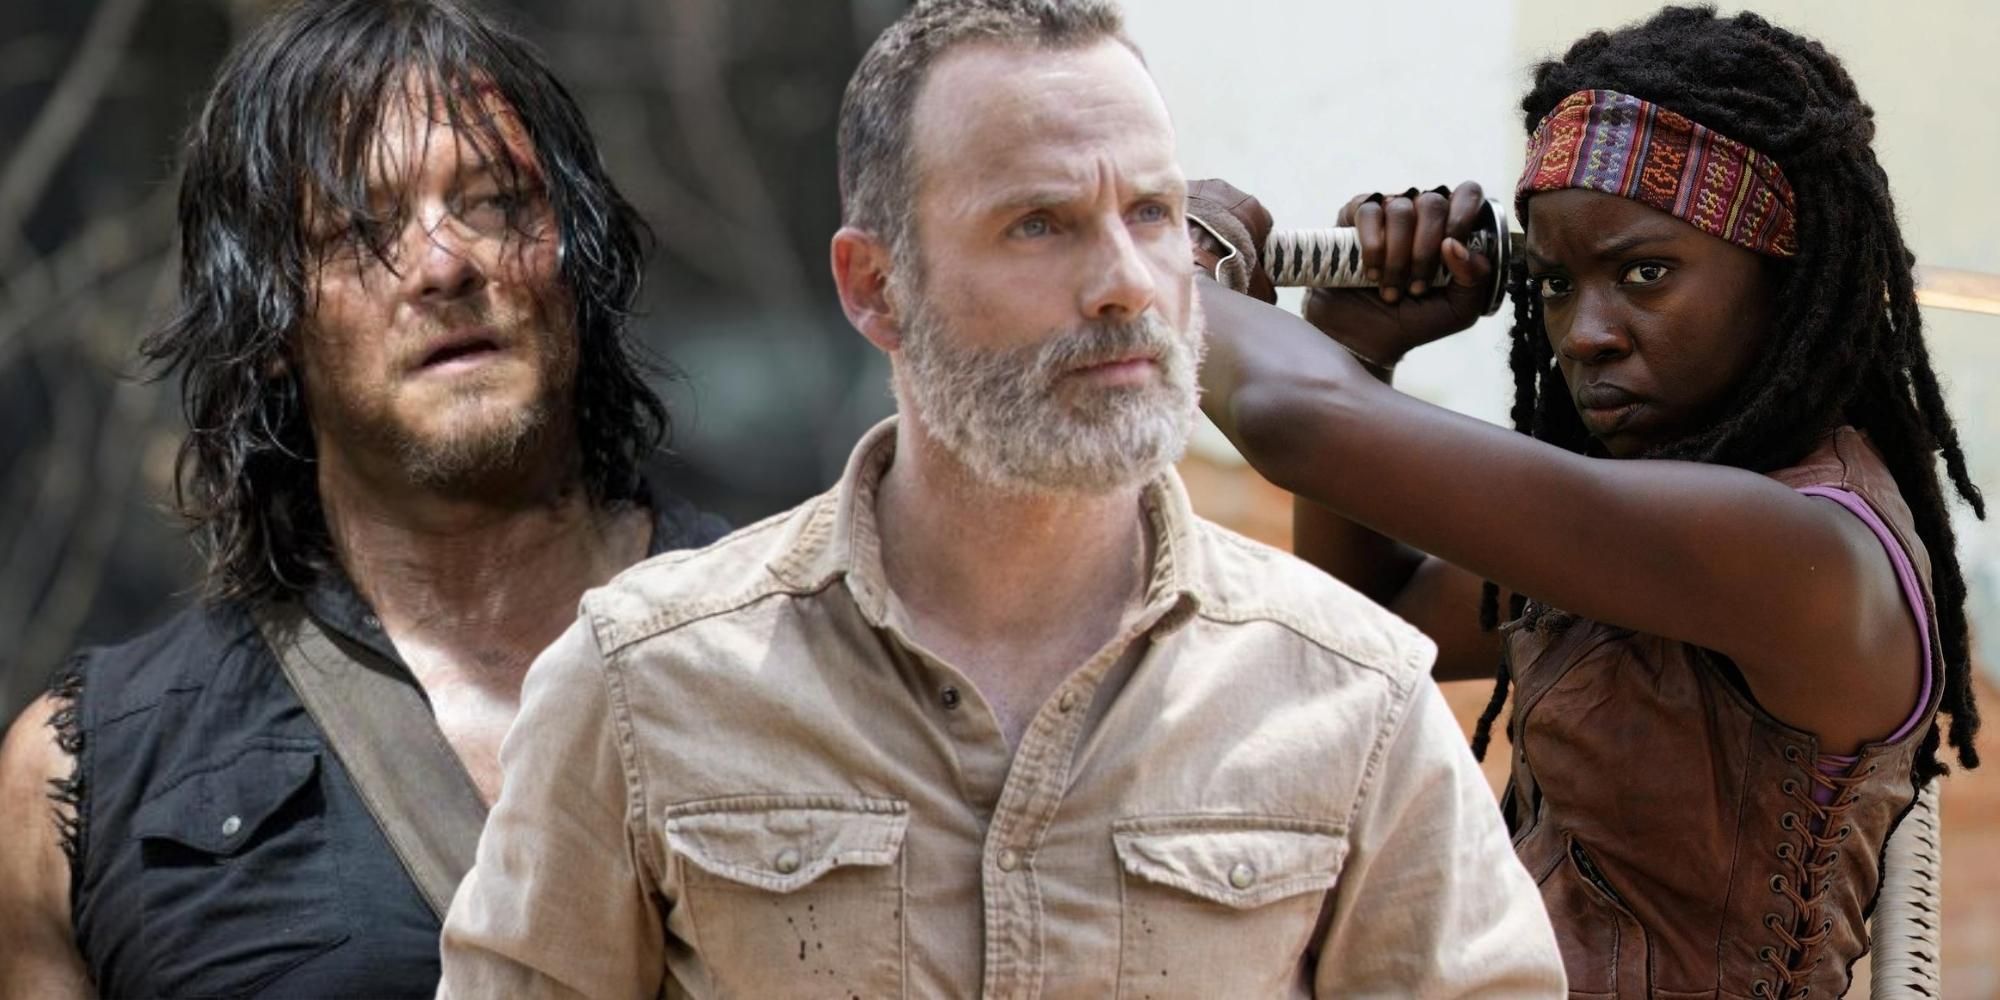 A collage of Daryl Dixon, Rick Grimes, and Michonne in The Walking Dead